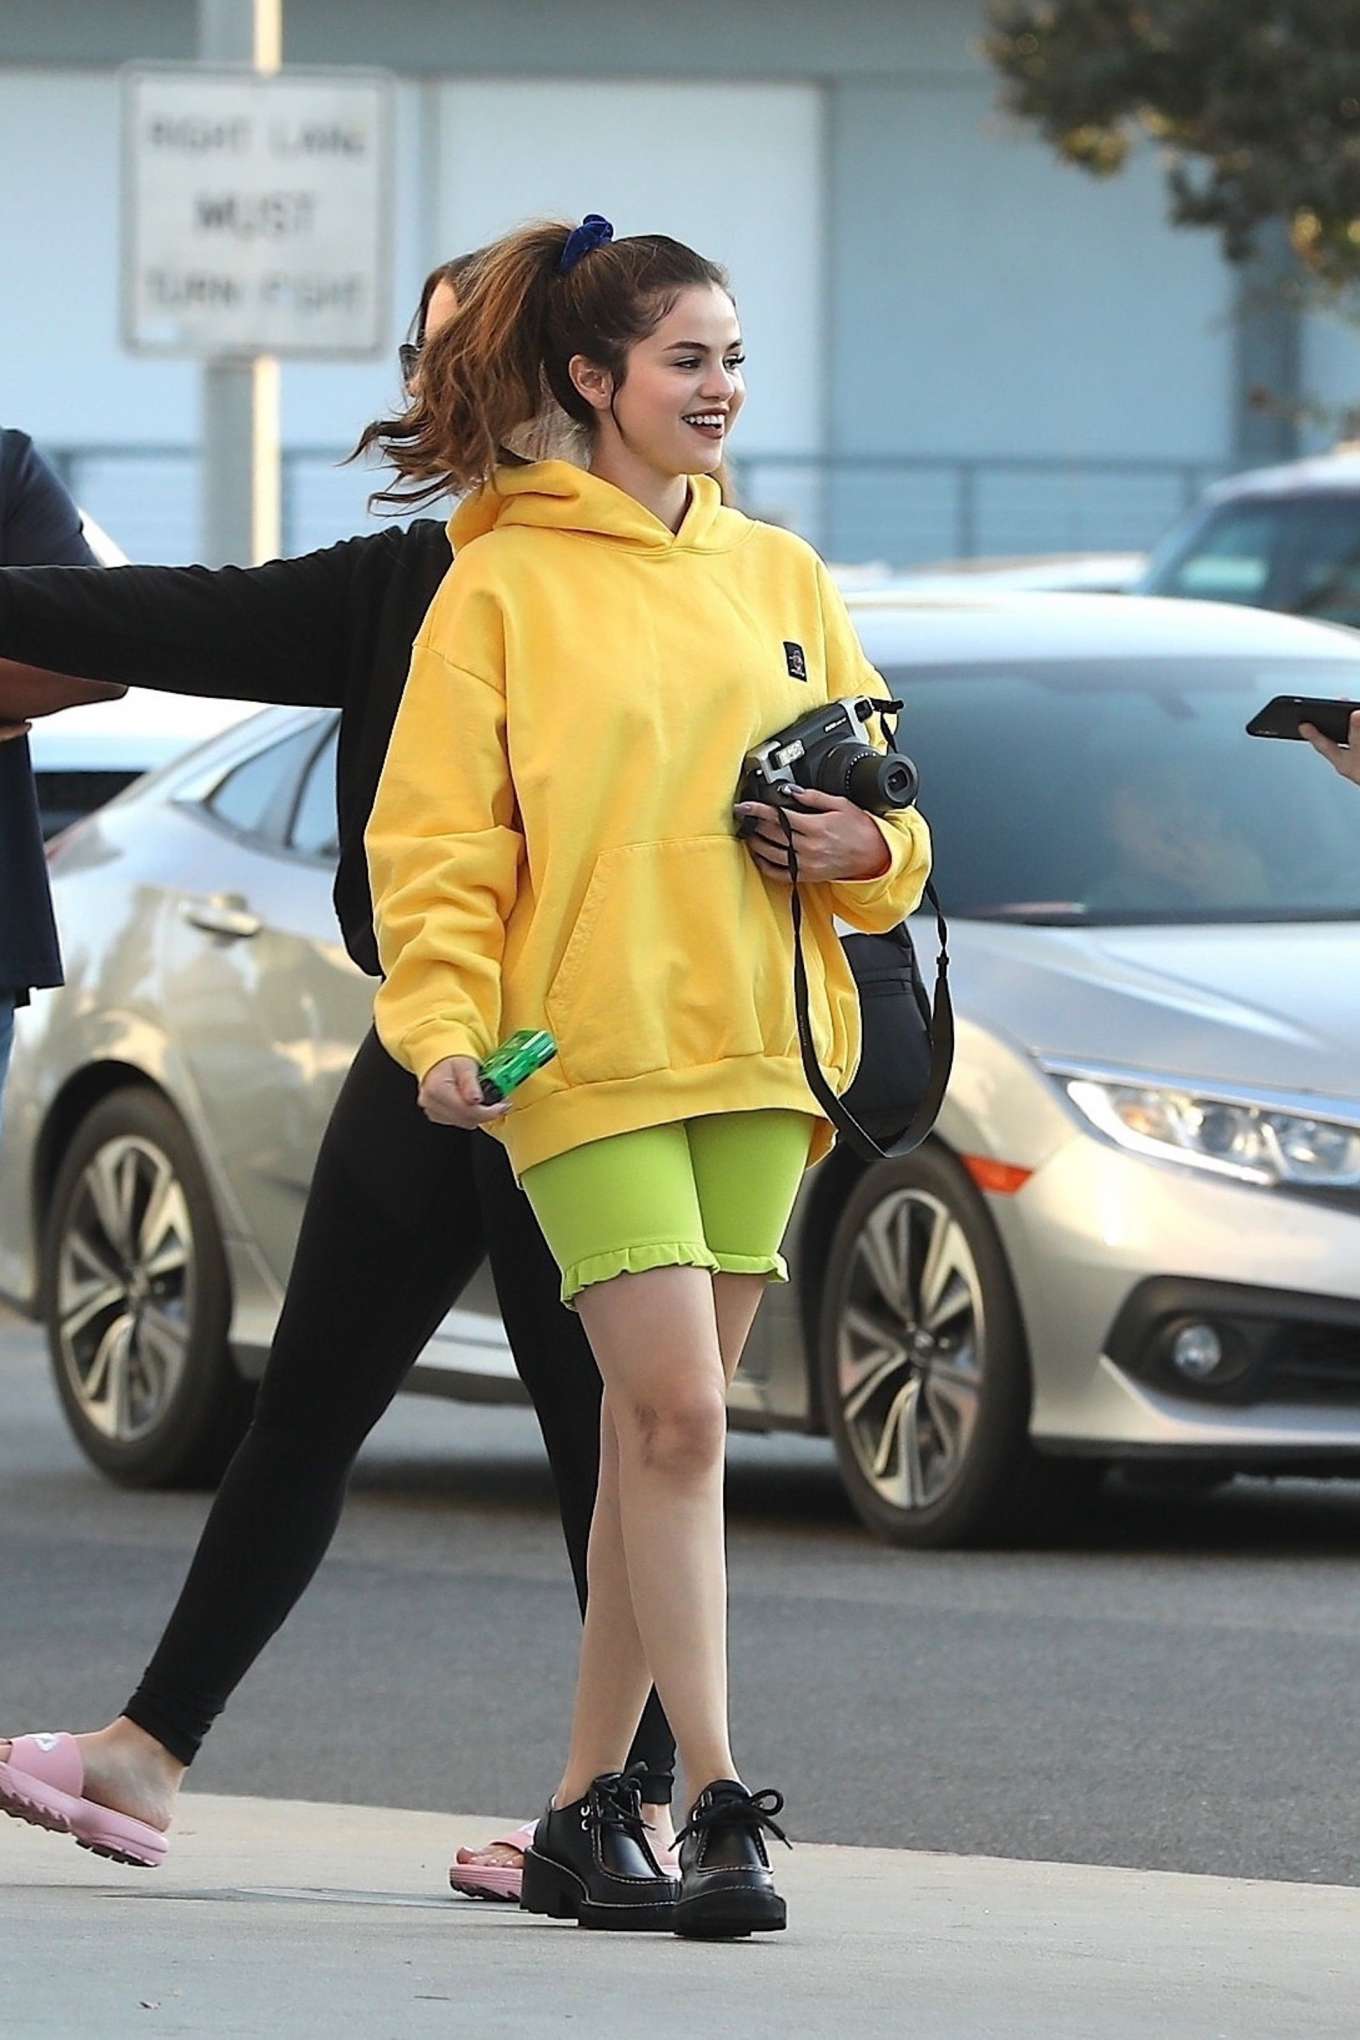 Selena Gomez 2019 : Selena Gomez – Shops with friends at Gelsons in Los Angeles-20